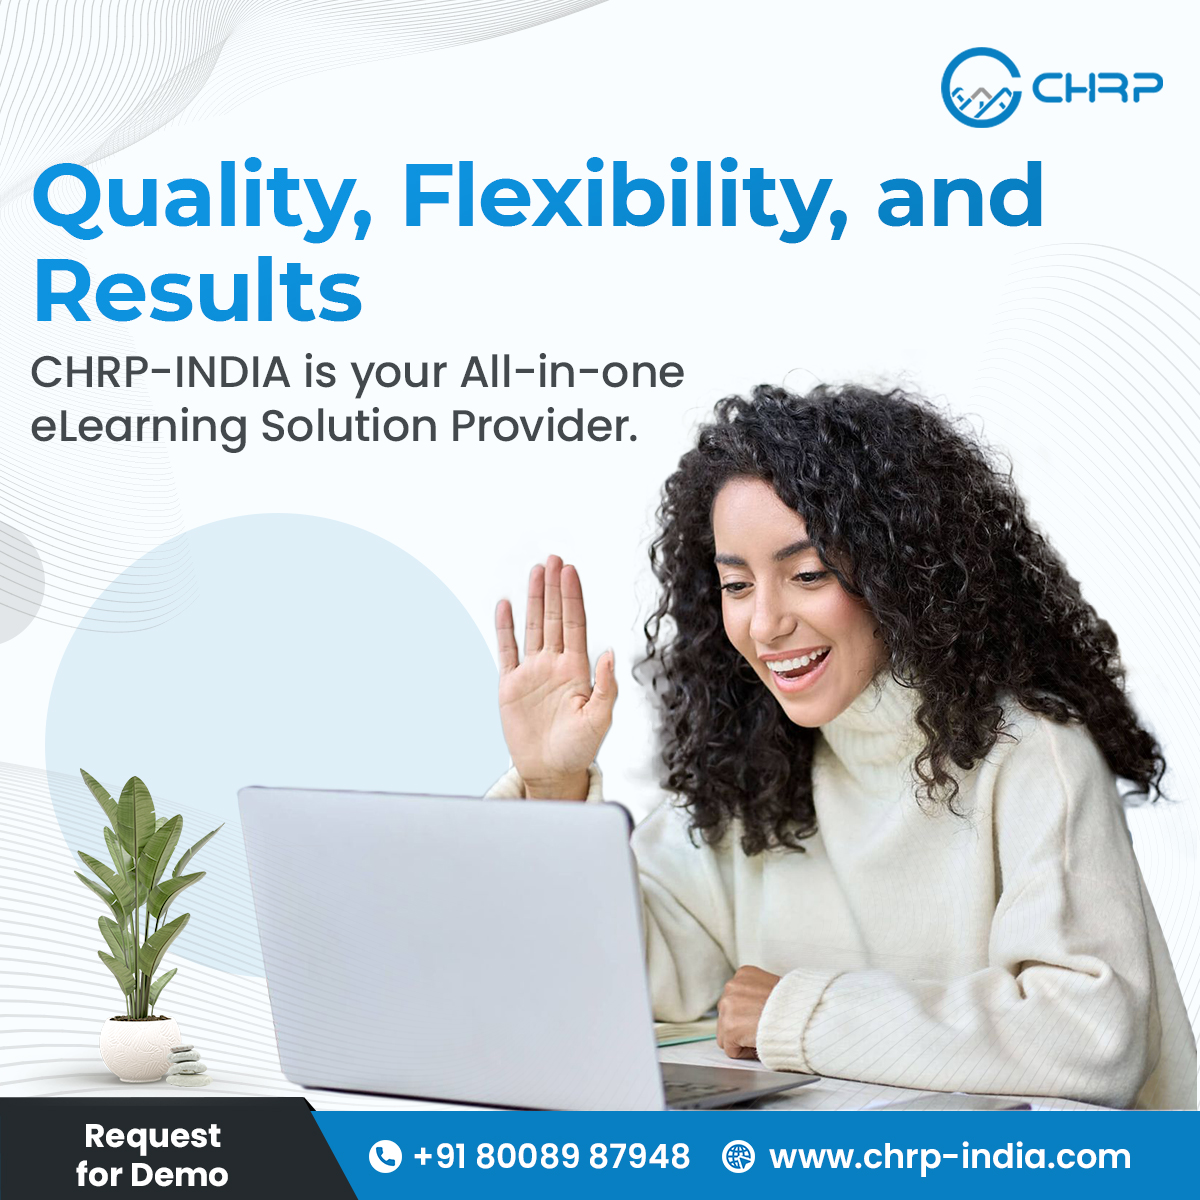 CHRP-INDIA is your All-in-one eLearning Solution Provider for Quality, Flexibility, and Results

For Onsite Demo
🌐 chrp-india.com
📧 reach@chrp-india.com
📱 +918008987948

#eLearning #engagingeLearning #training #knowledgeretention #motivation #effectivelearning #learn